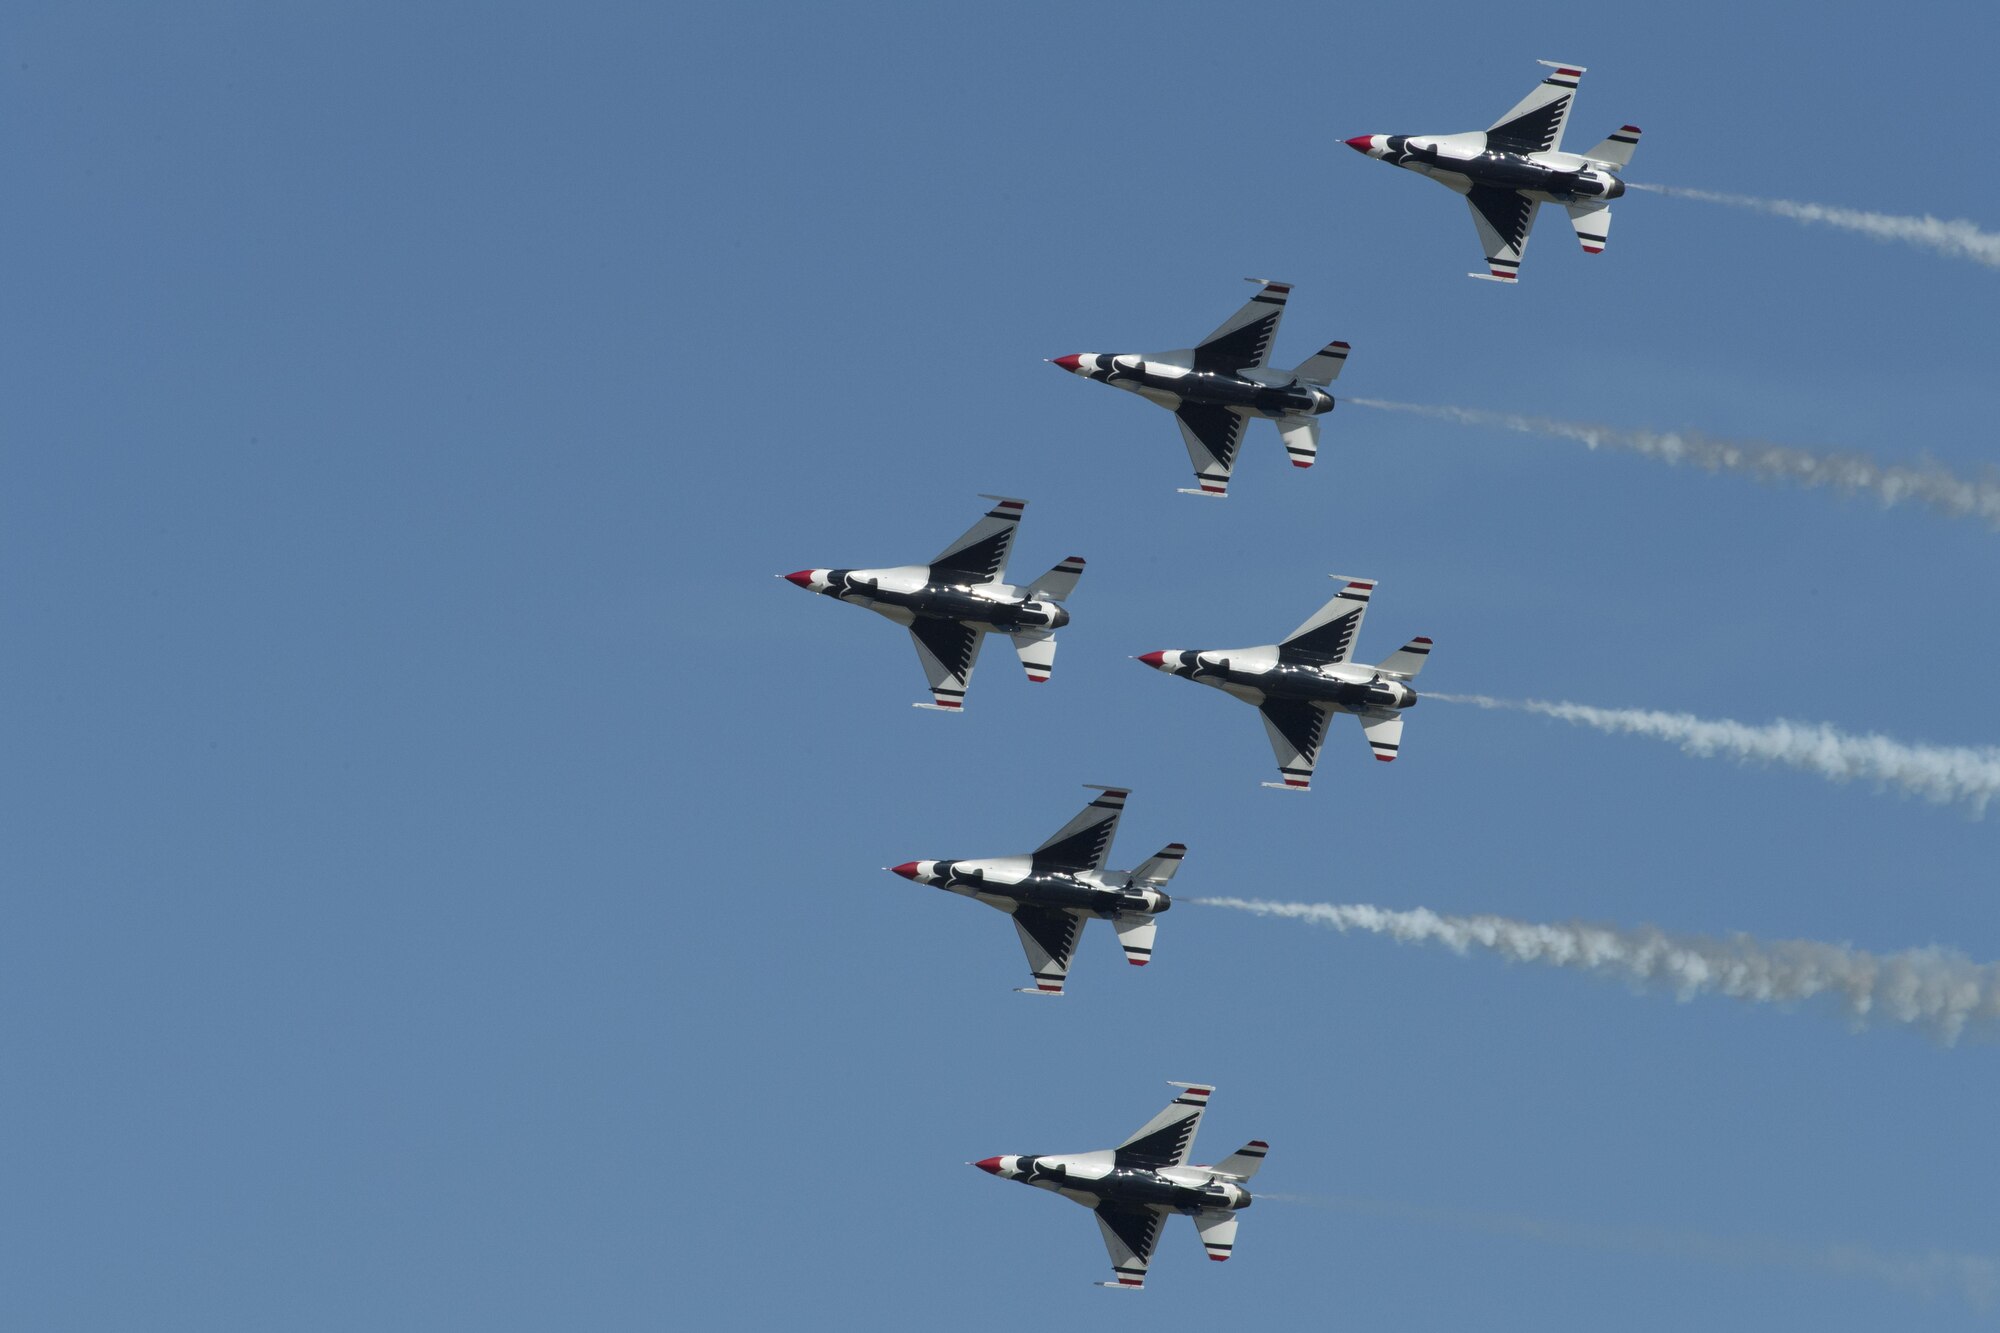 The U.S. Air Force Thunderbirds Flight Demonstration Team soars above Moody Air Force Base during the Thunder Over South Georgia Air Show, Oct. 29, 2017. The Thunderbirds, based out of Nellis Air Force Base, Nev., are the Air Force’s premier aerial demonstration team, performing at air shows and special events worldwide. (U.S. Air Force photo by Senior Airman Janiqua P. Robinson)